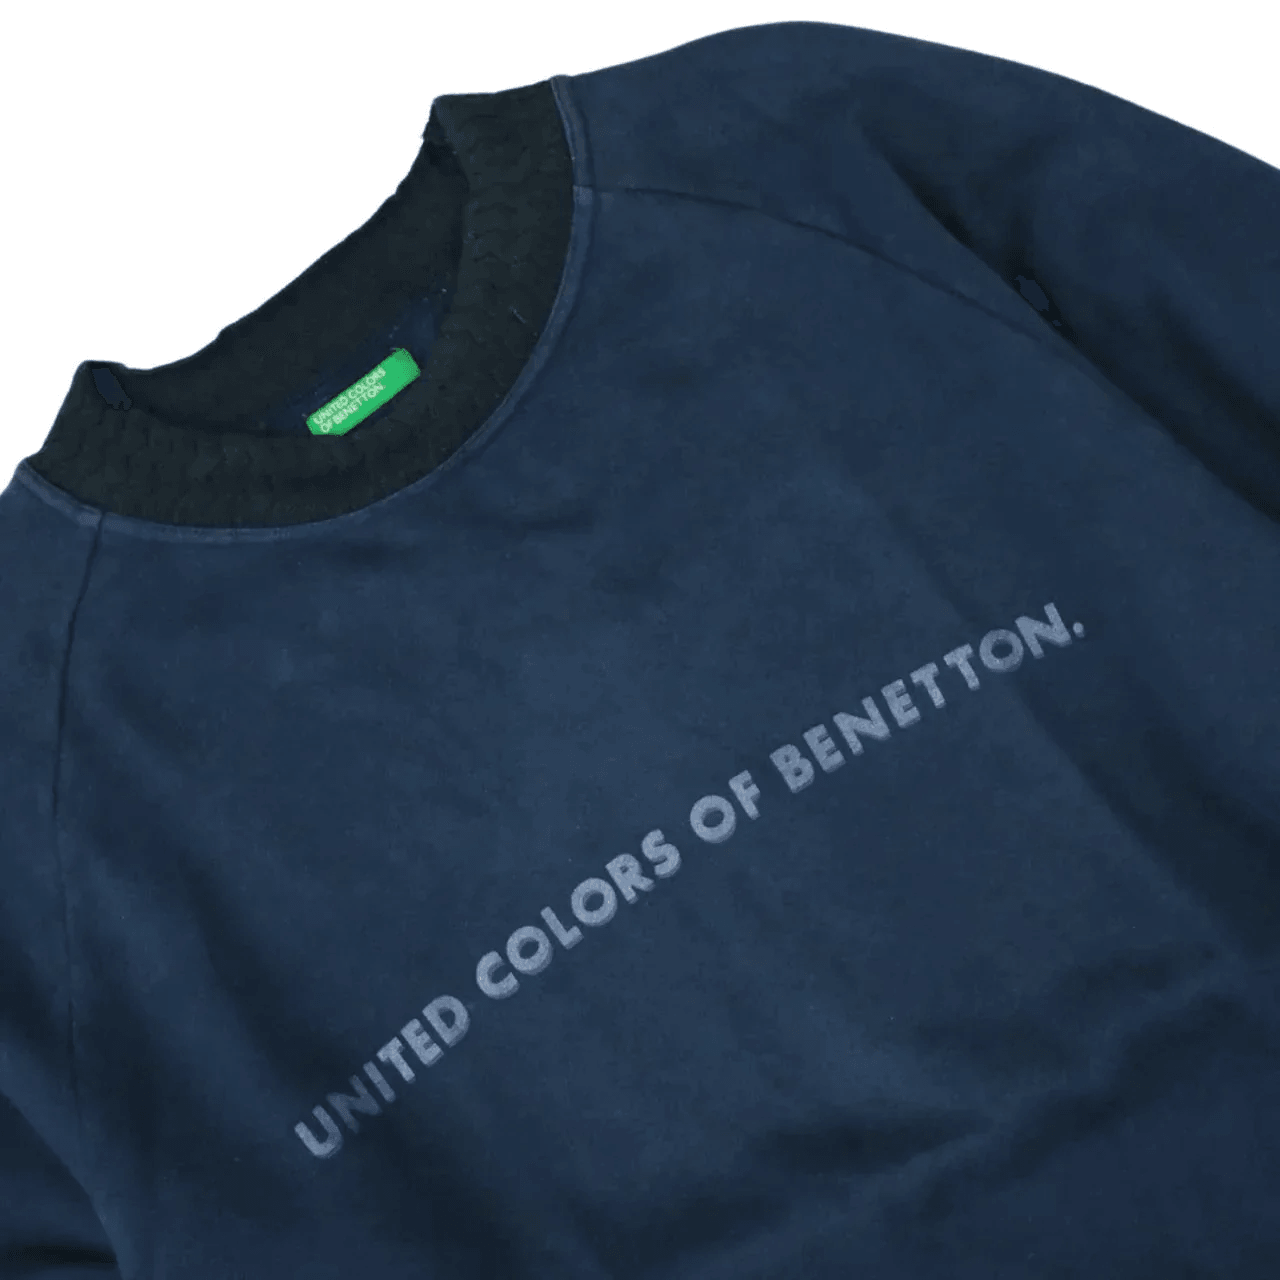 BENETTON NAVY SPELL OUT SWEATER (S) - Known Source